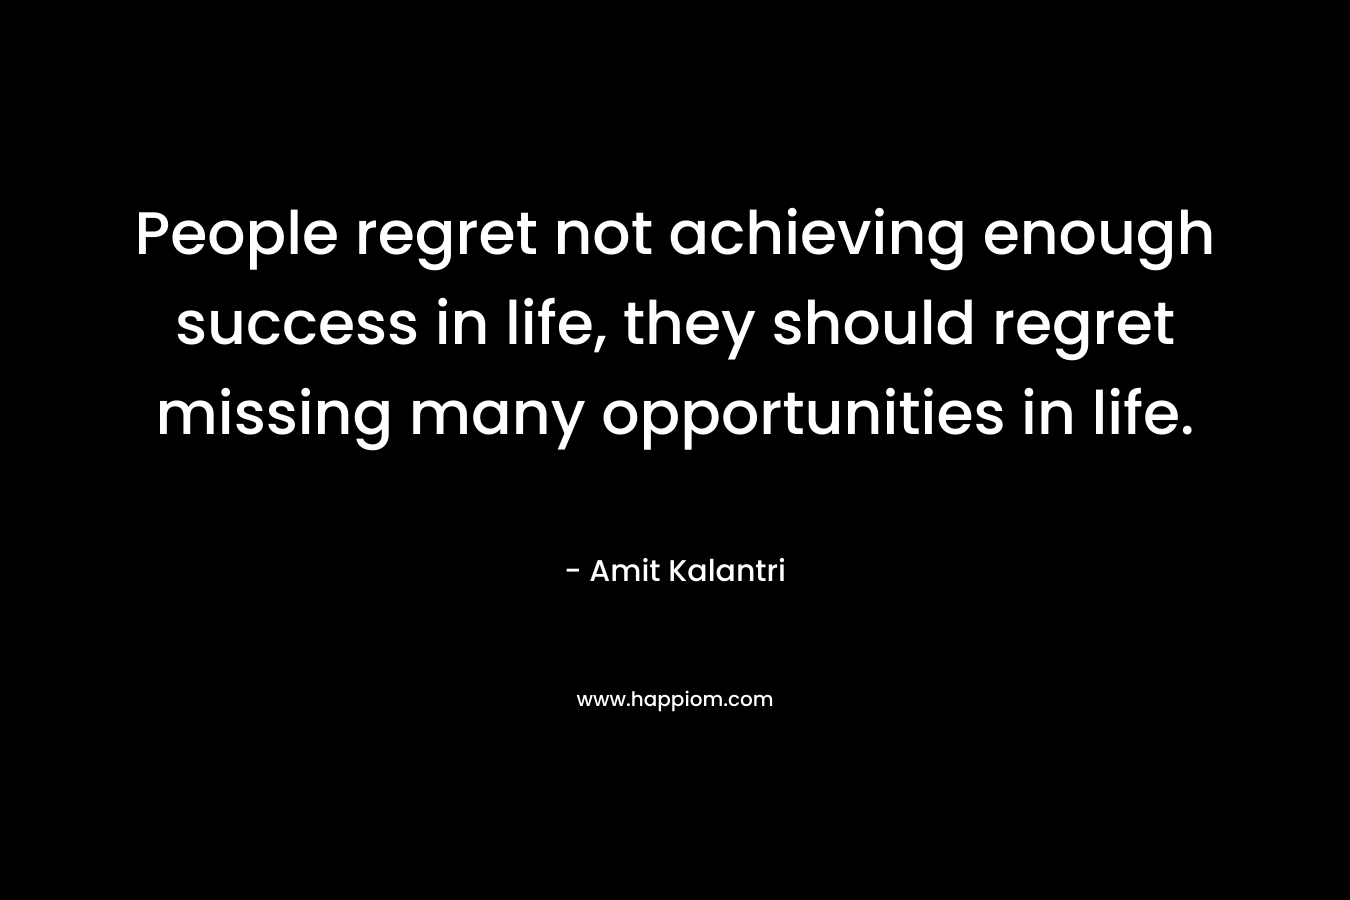 People regret not achieving enough success in life, they should regret missing many opportunities in life.